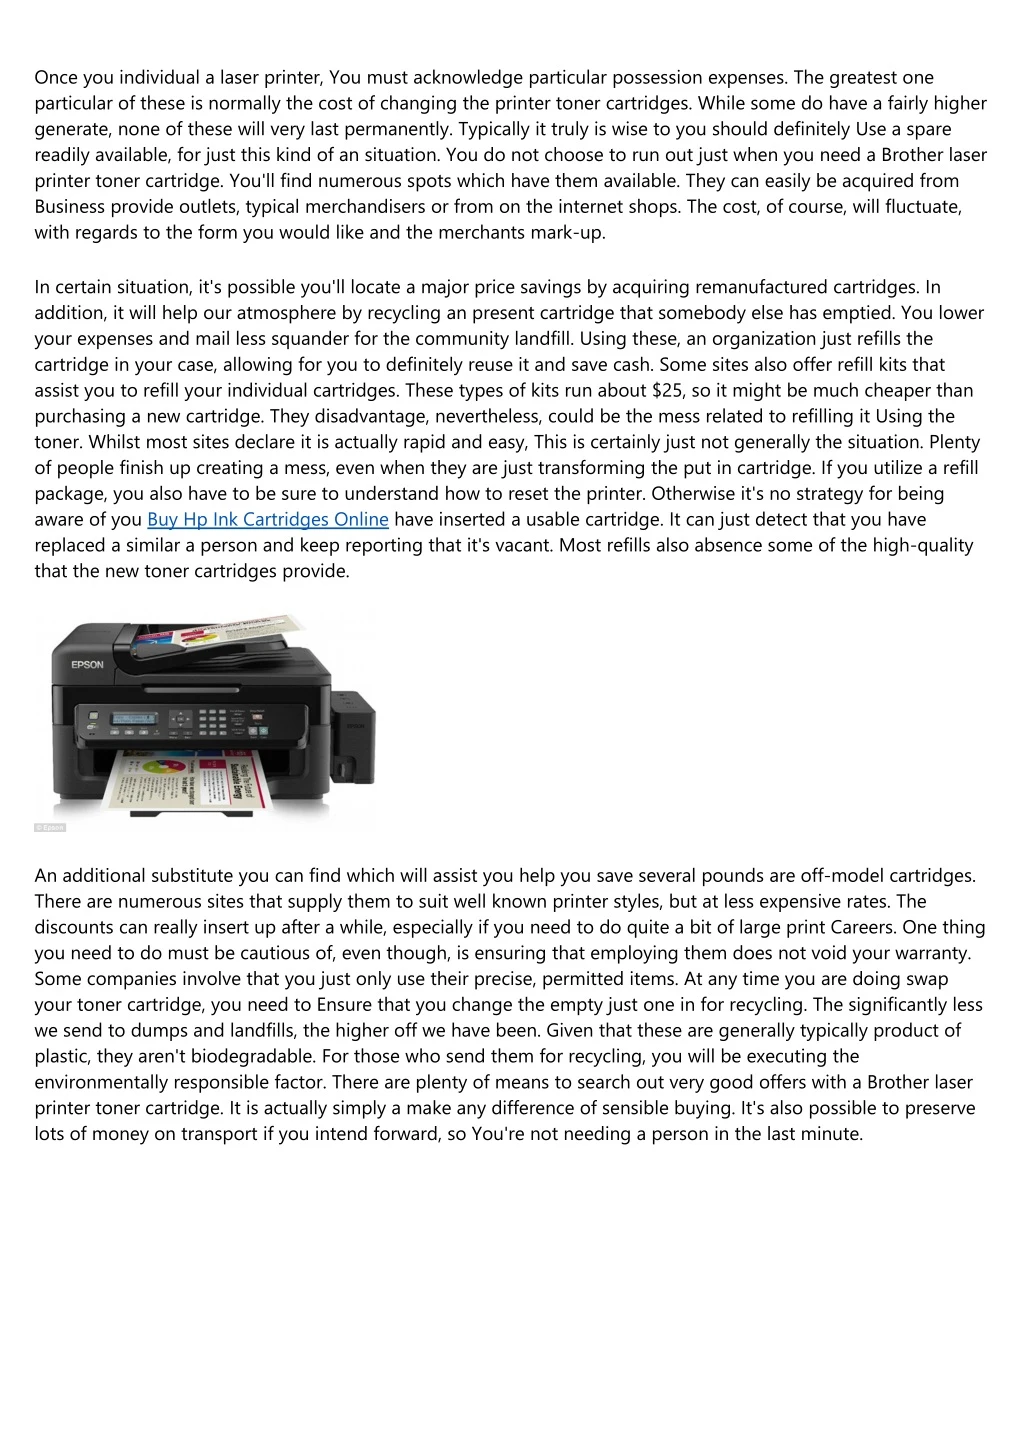 once you individual a laser printer you must